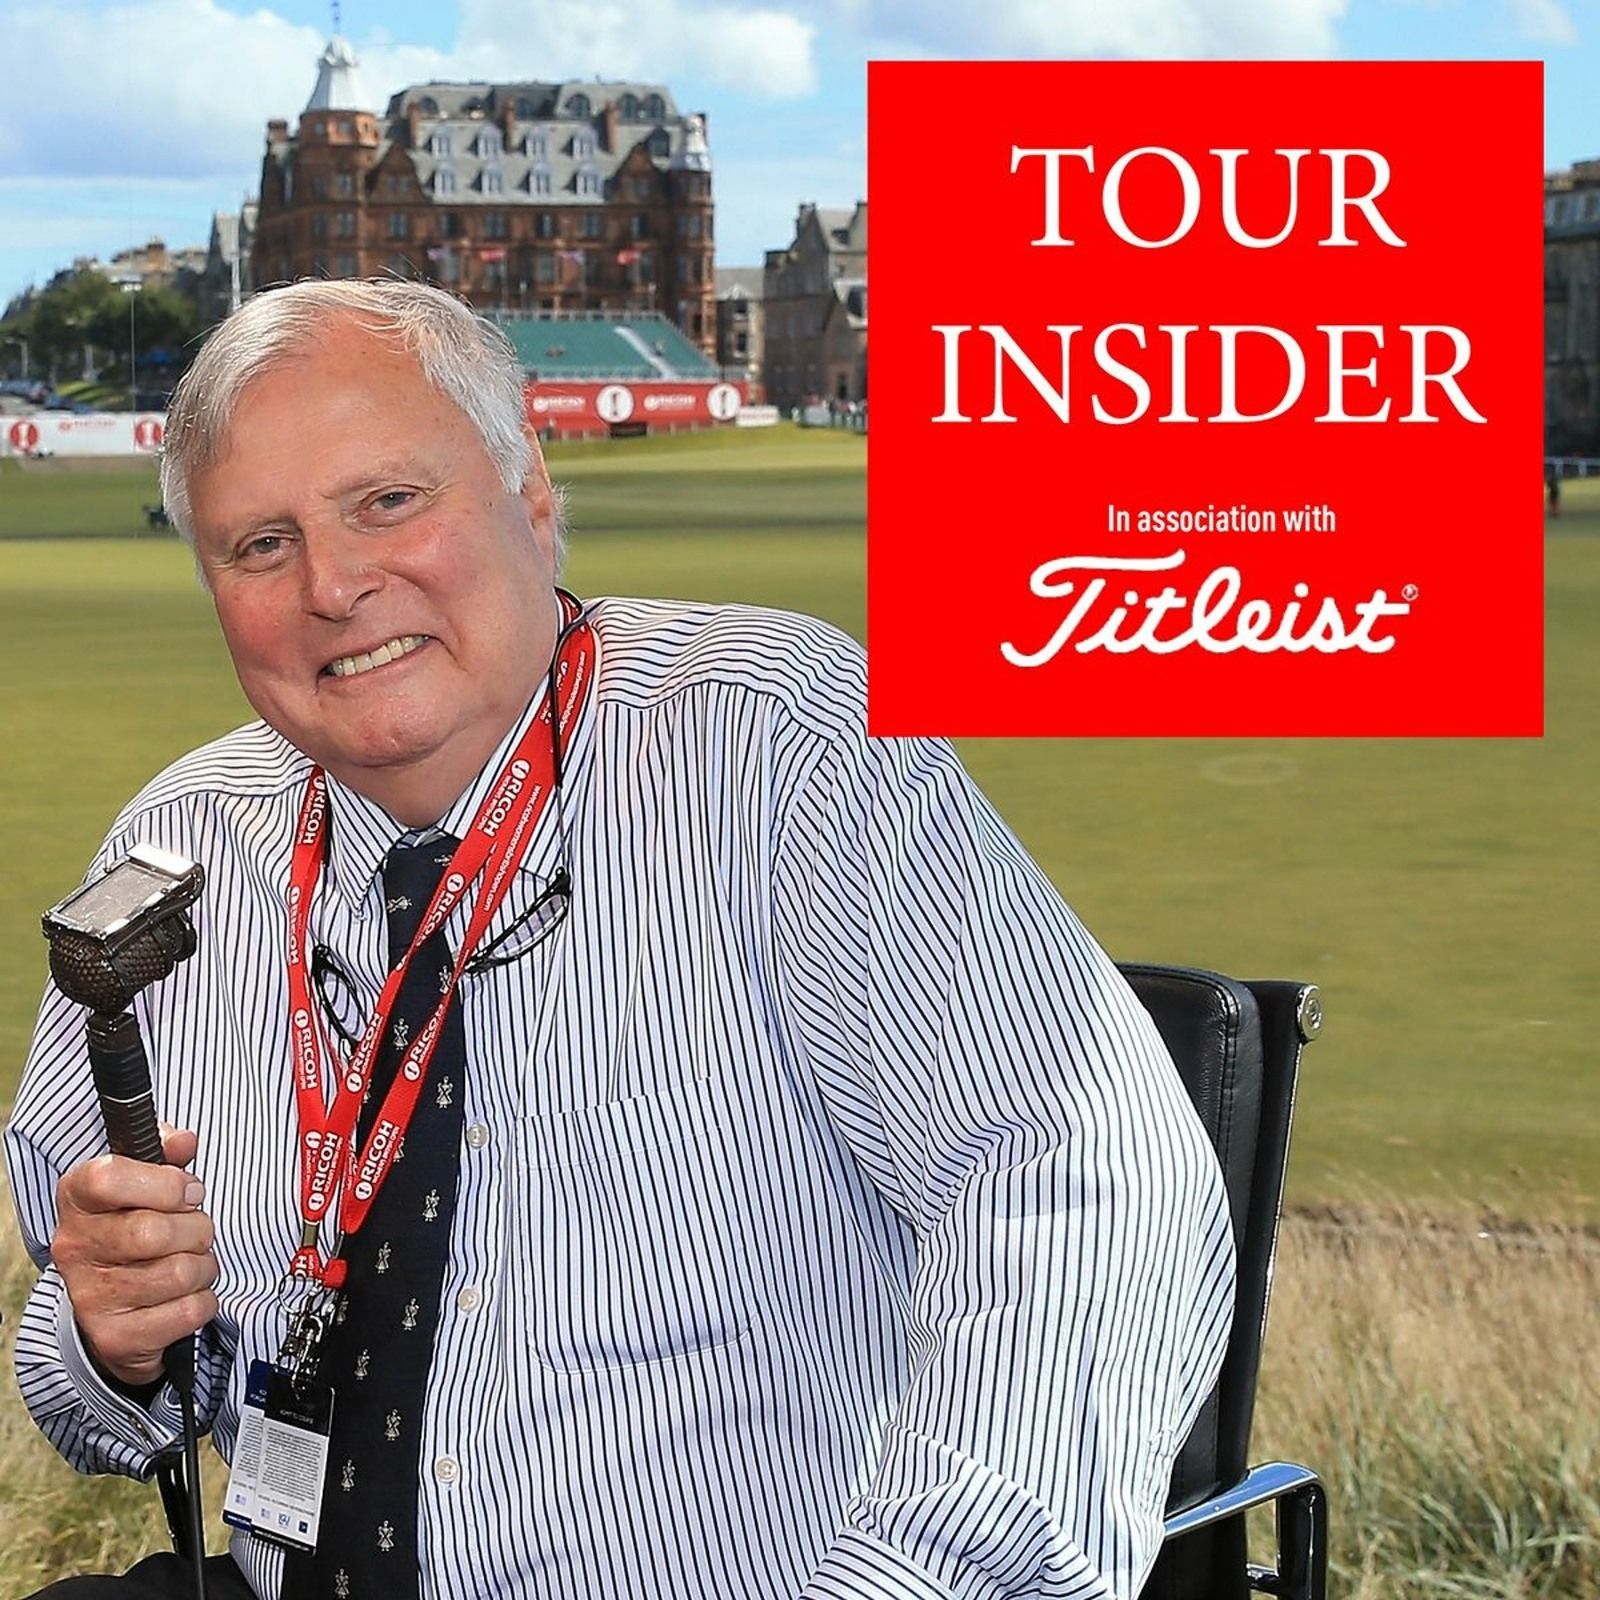 ”The Jack Nicklaus Of Commentary” - Peter Alliss Tribute